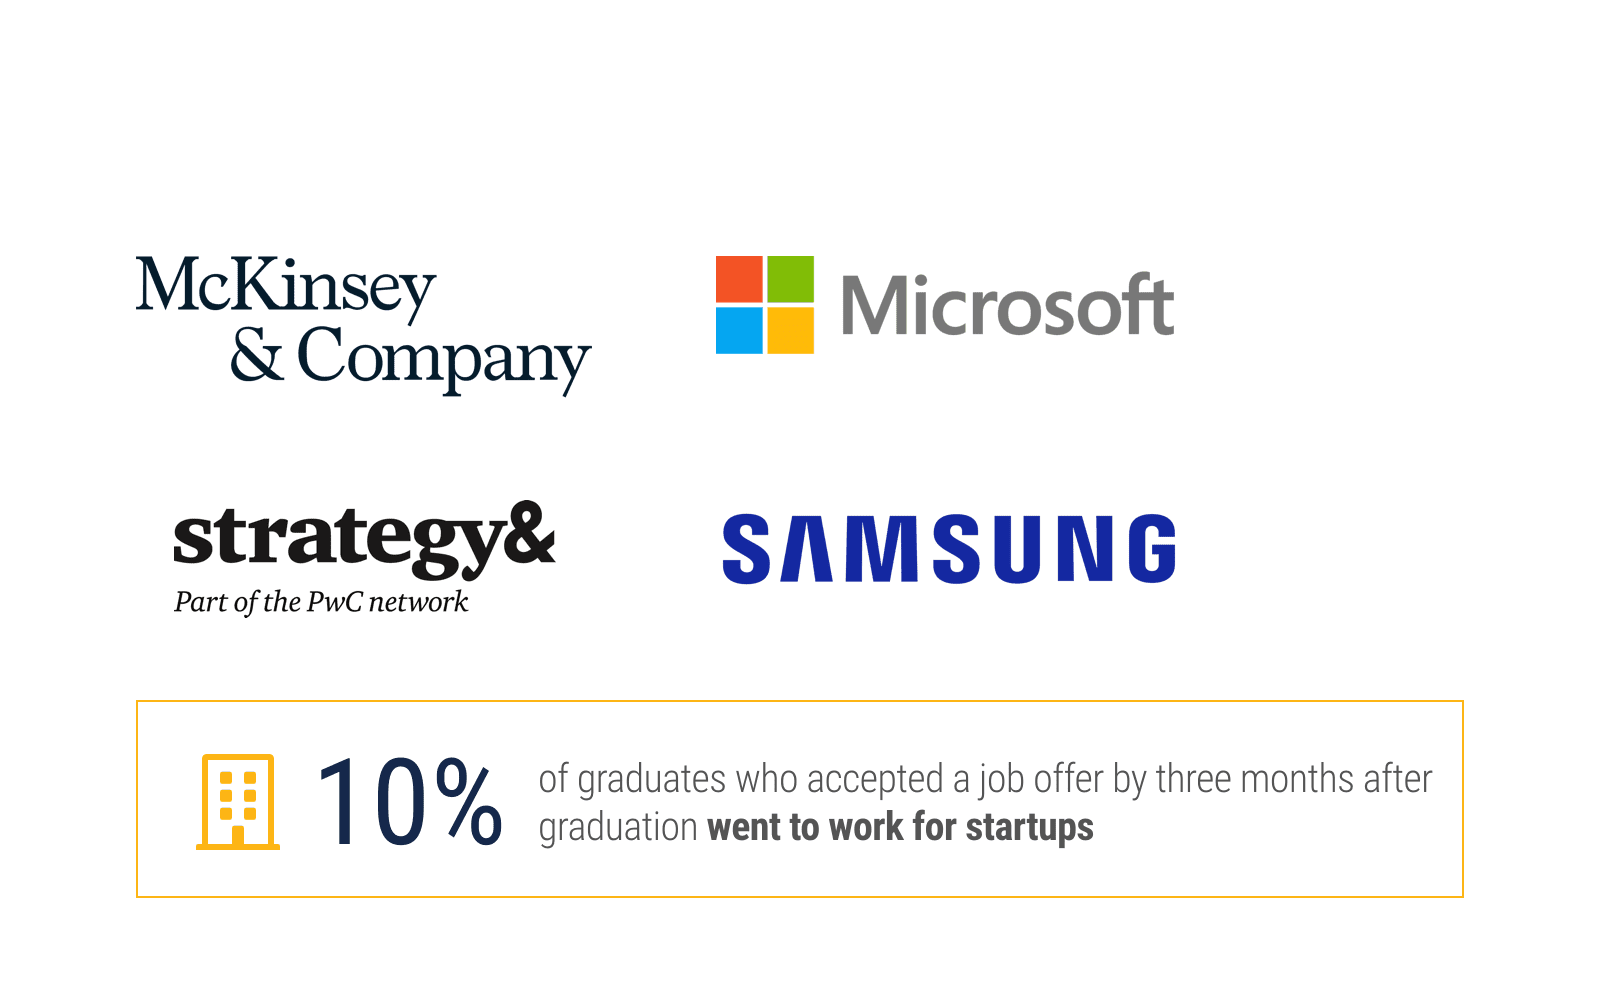 (Continued) Logos showing top employers who hired 3 or more students from class of 2021. 10% of graduates who accepted a job offer by three months after graduation went to work for startups, details described below.